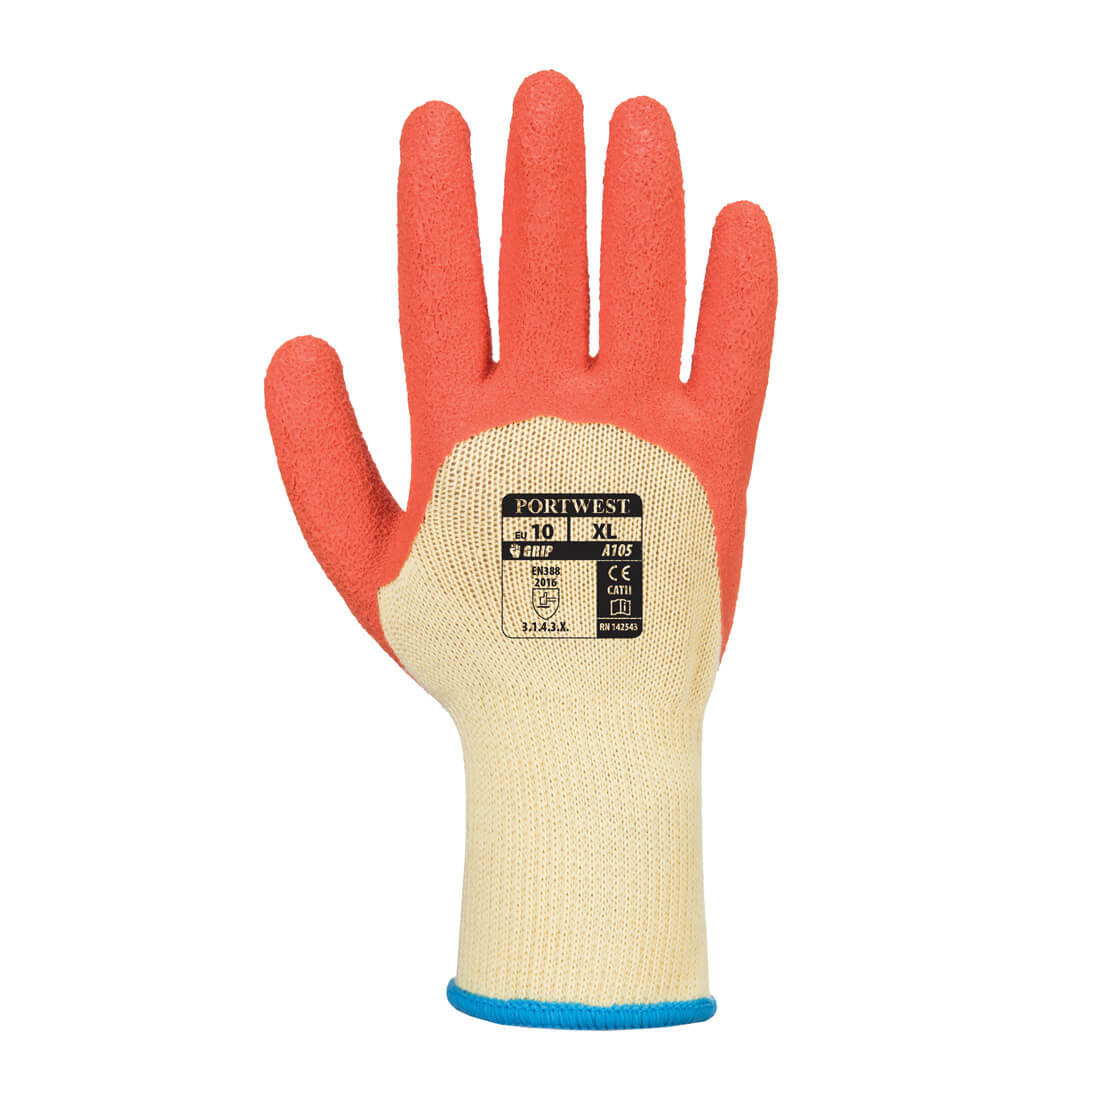 Xtra Grip Glove Latex - Personal protection